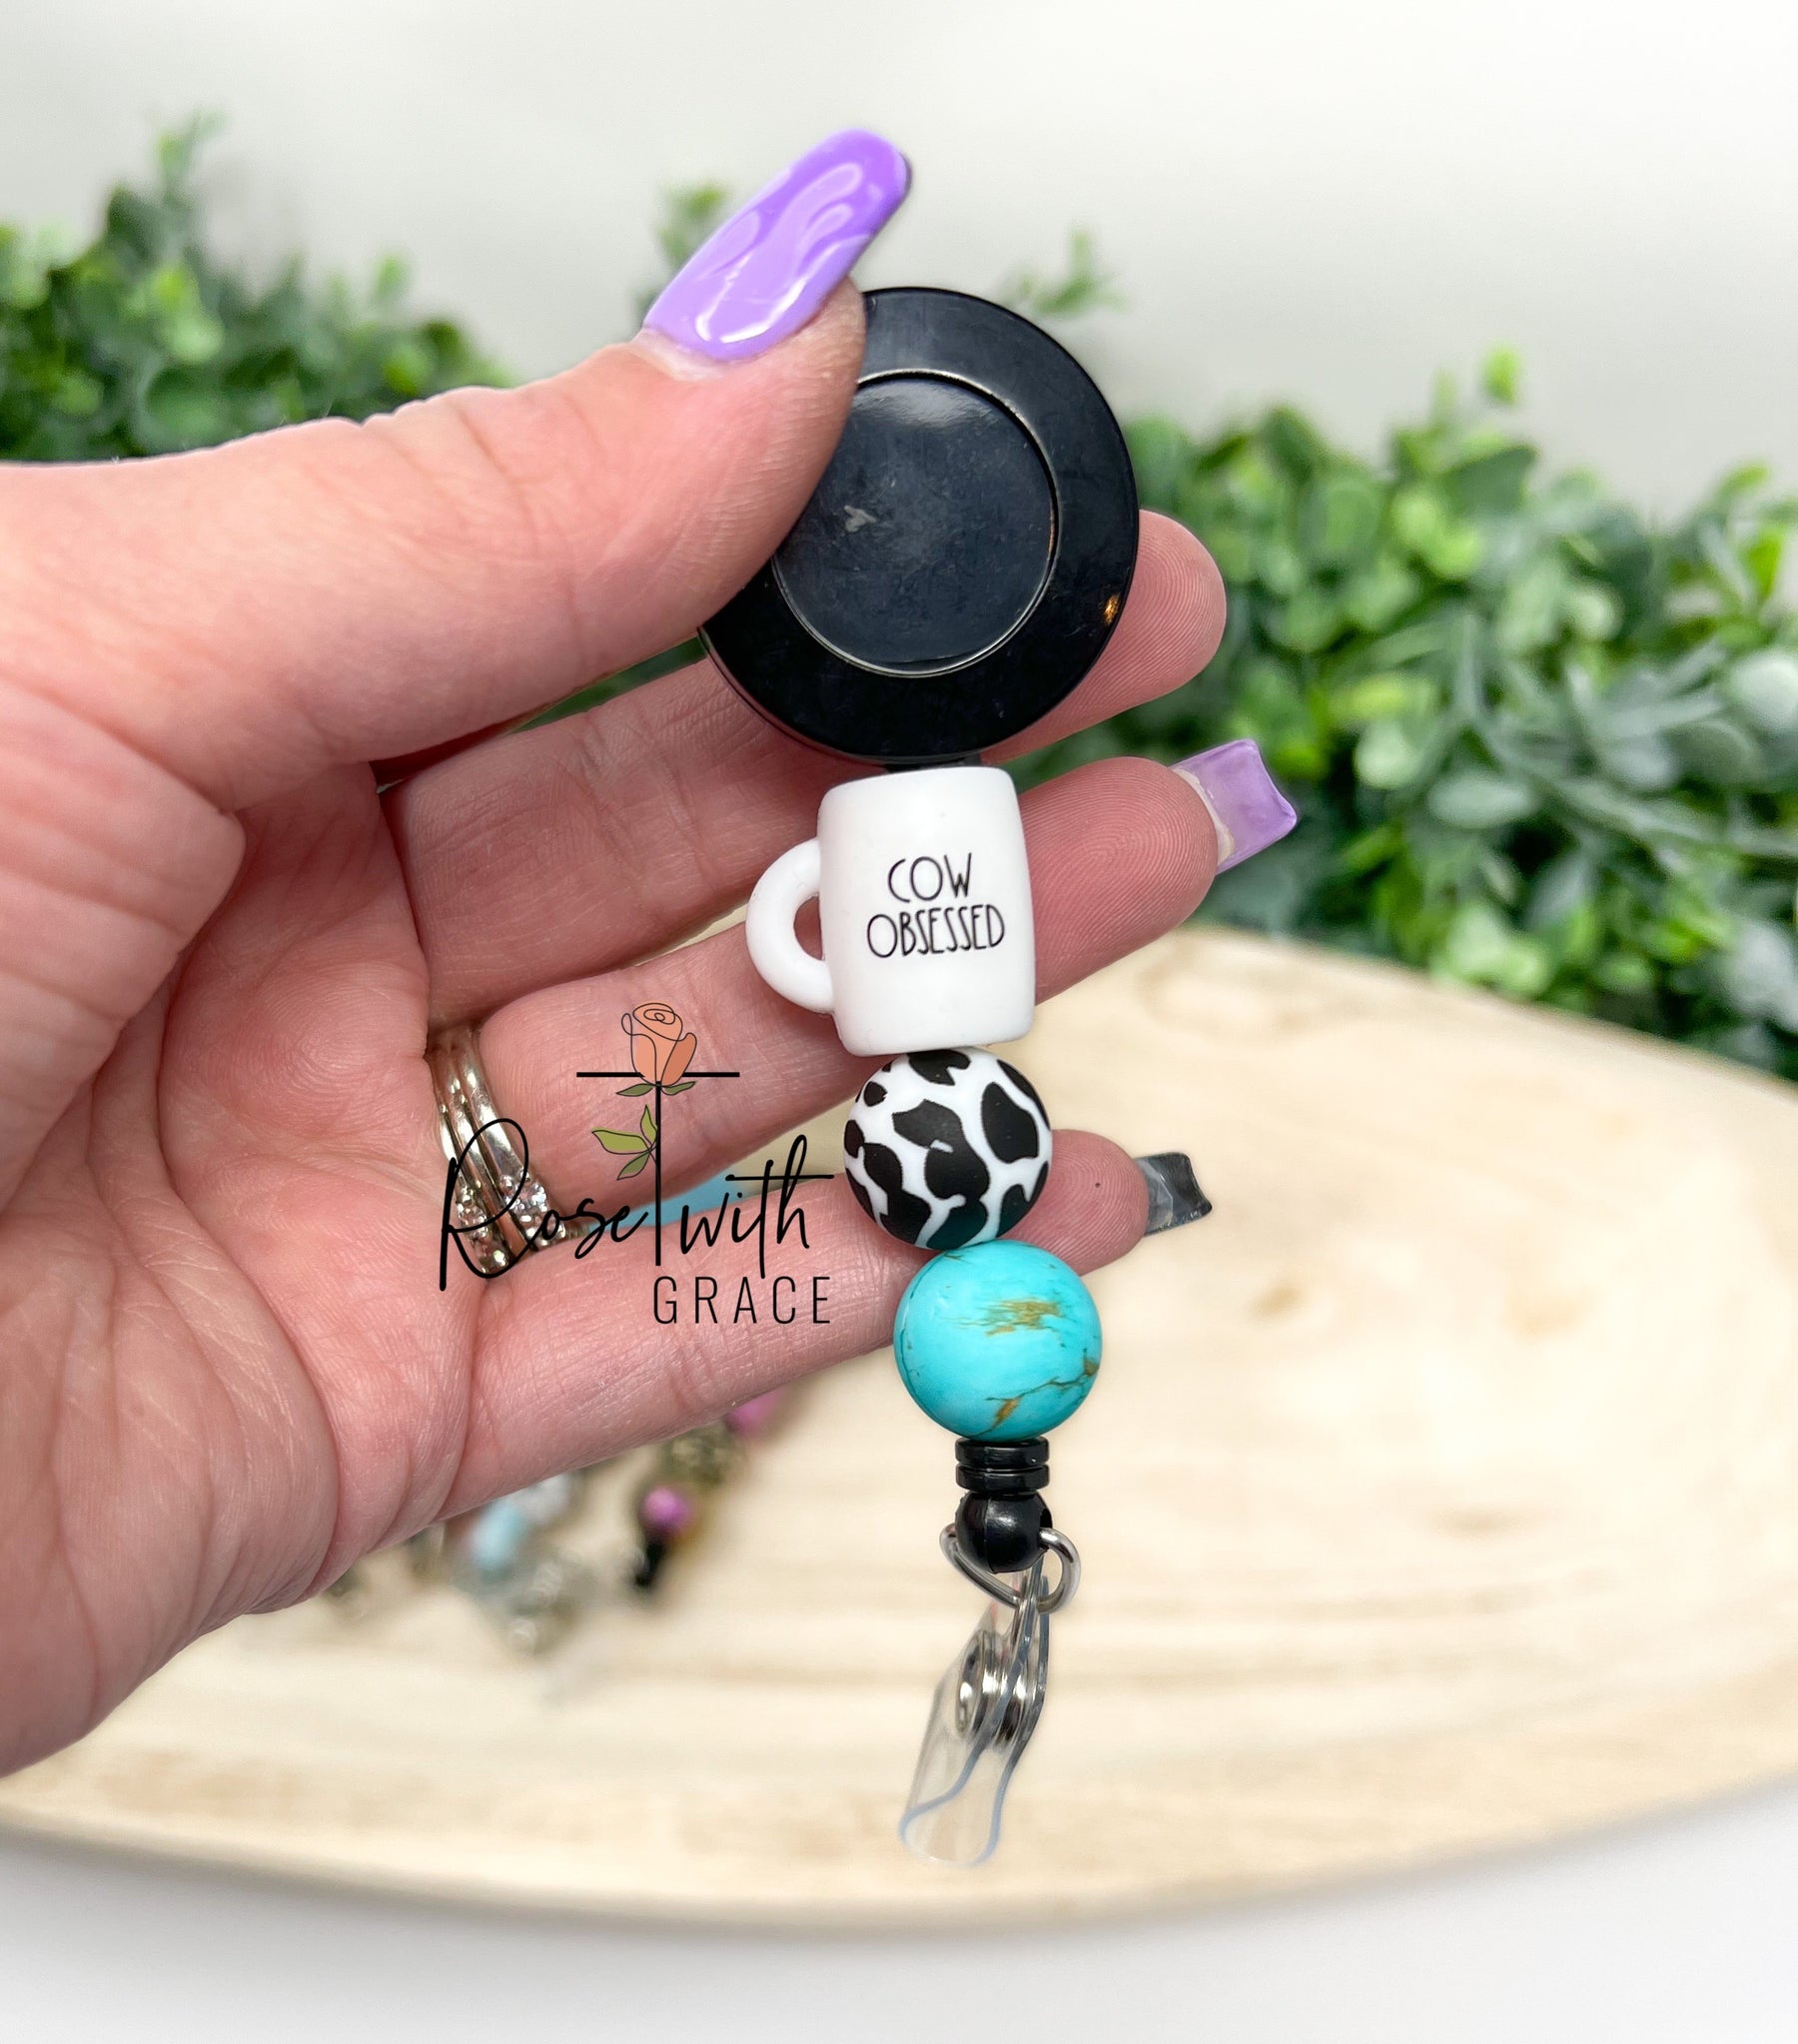 Coffee Cup Badge Reels Rose with Grace LLC